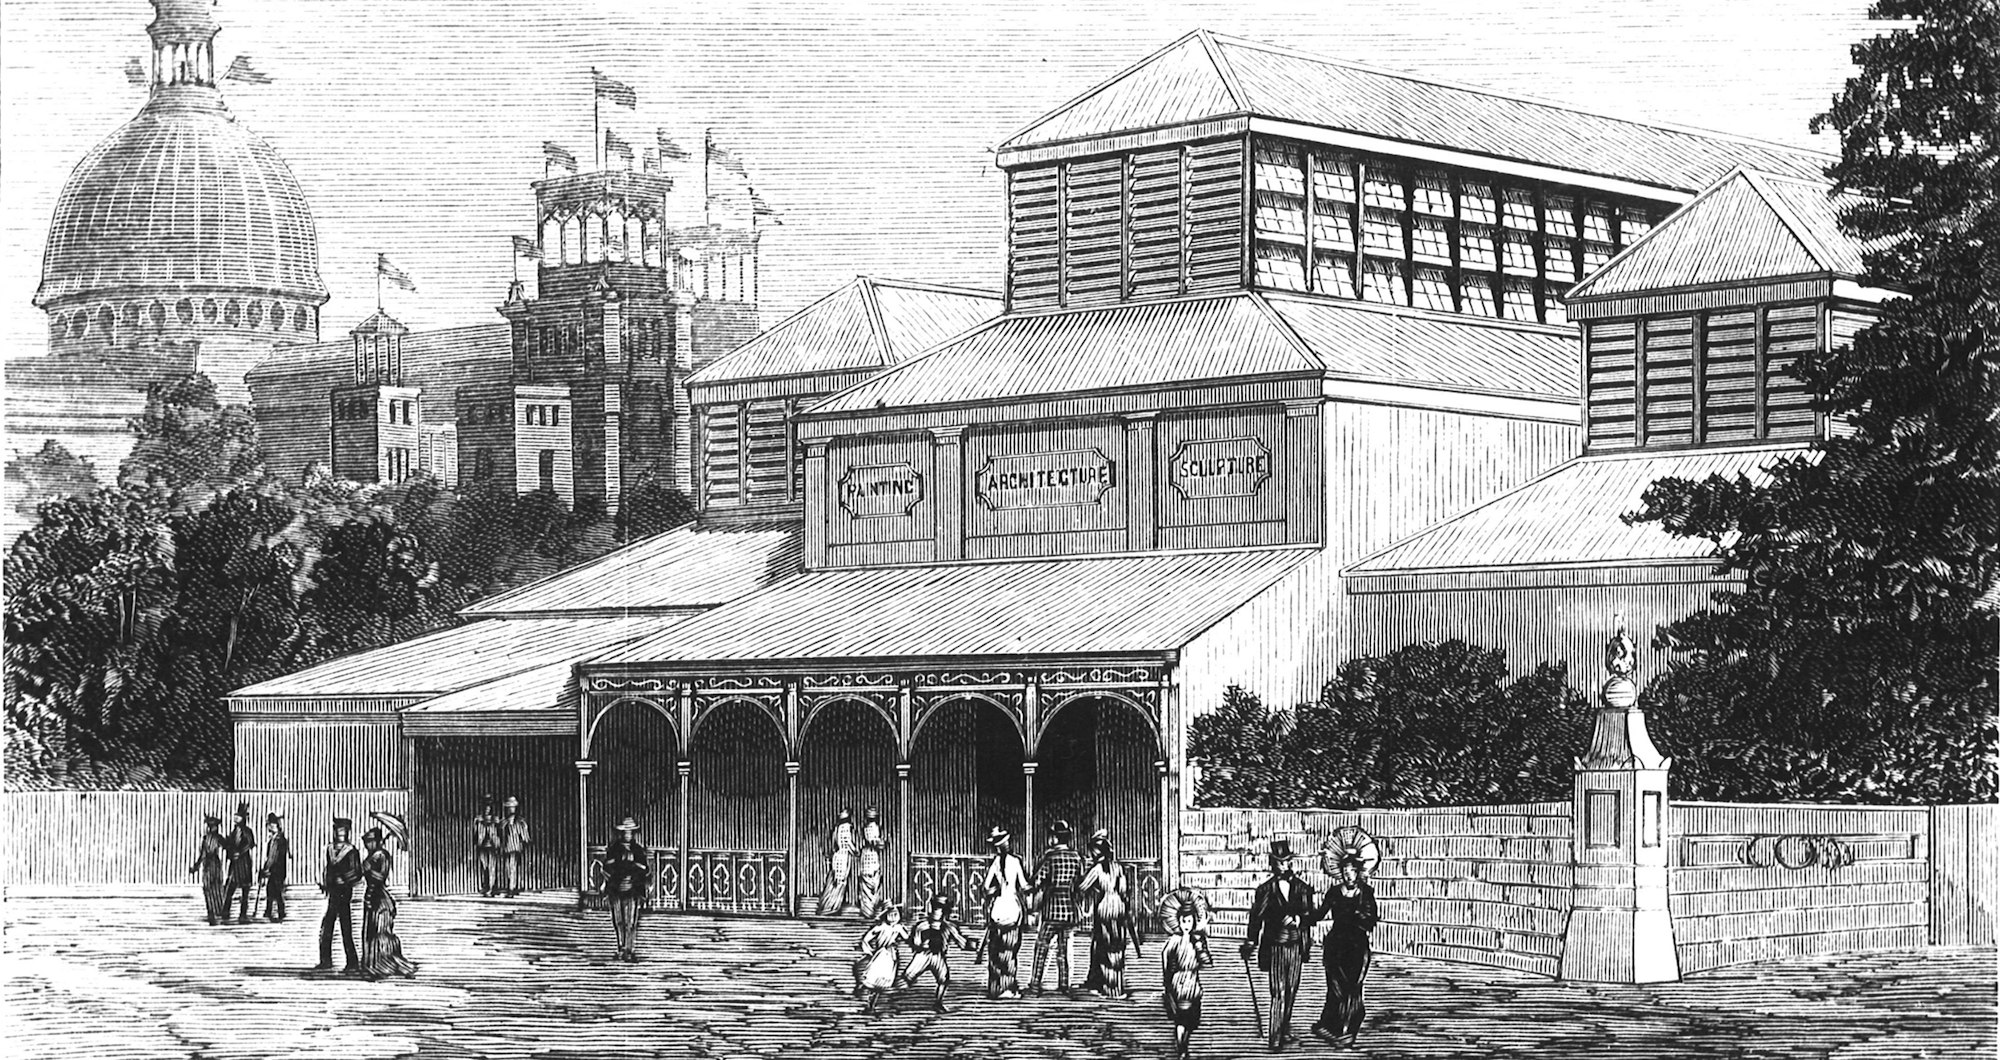 The Gallery’s first dedicated building is constructed in 1879 as part of the Sydney International Exhibition. Situated in the Botanic Garden, ‘The Fine Arts Annexe’, as it is known, consists of three long galleries designed by architect William Wardell. Image: Official Record of the International Exhibition